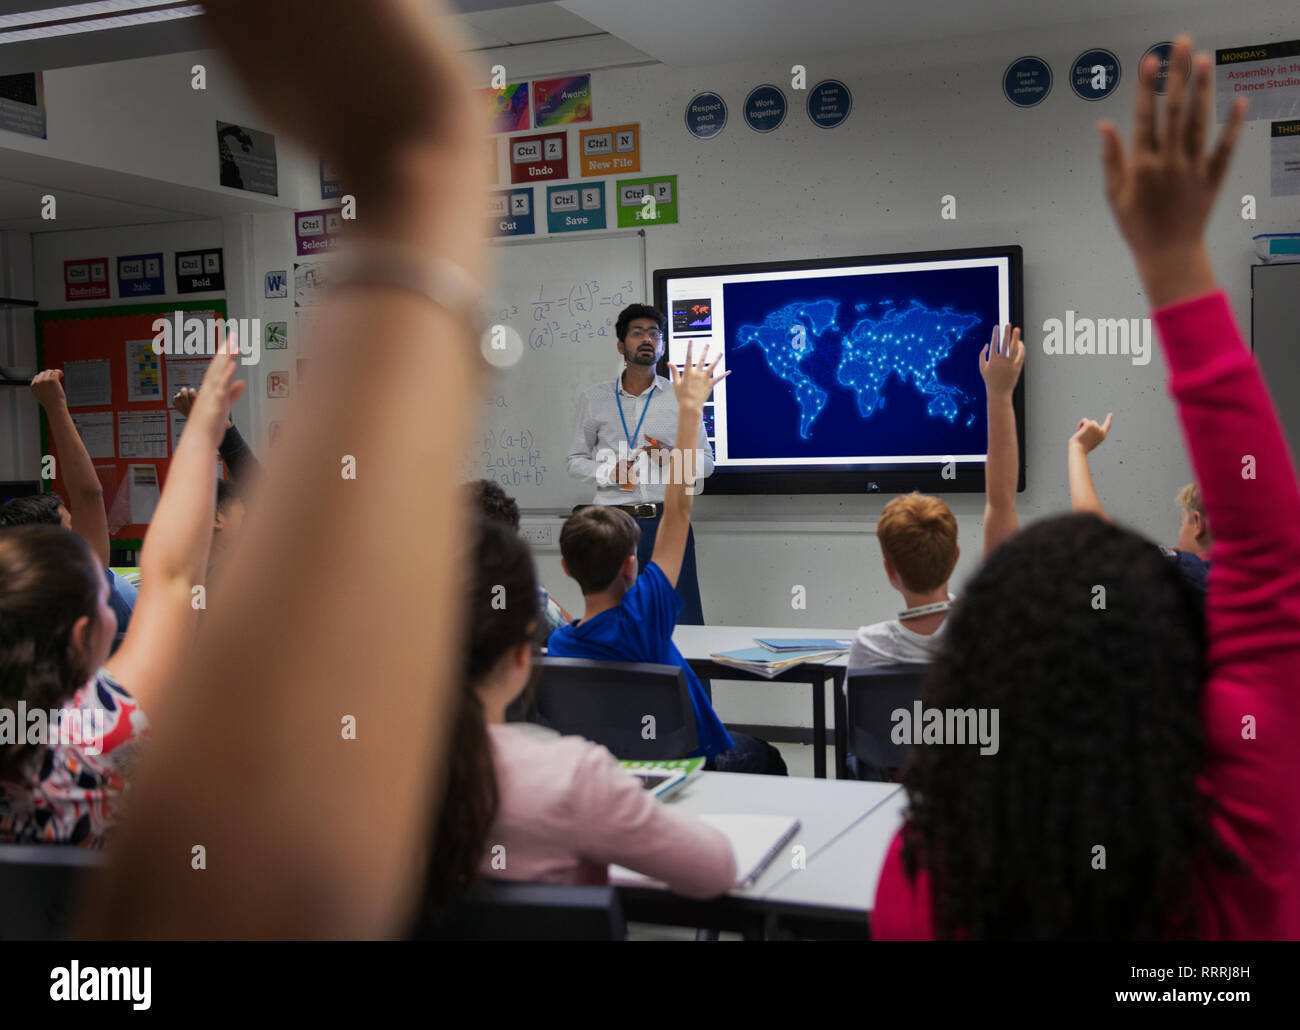 Junior high school students participating with hands raised in classroom Stock Photo